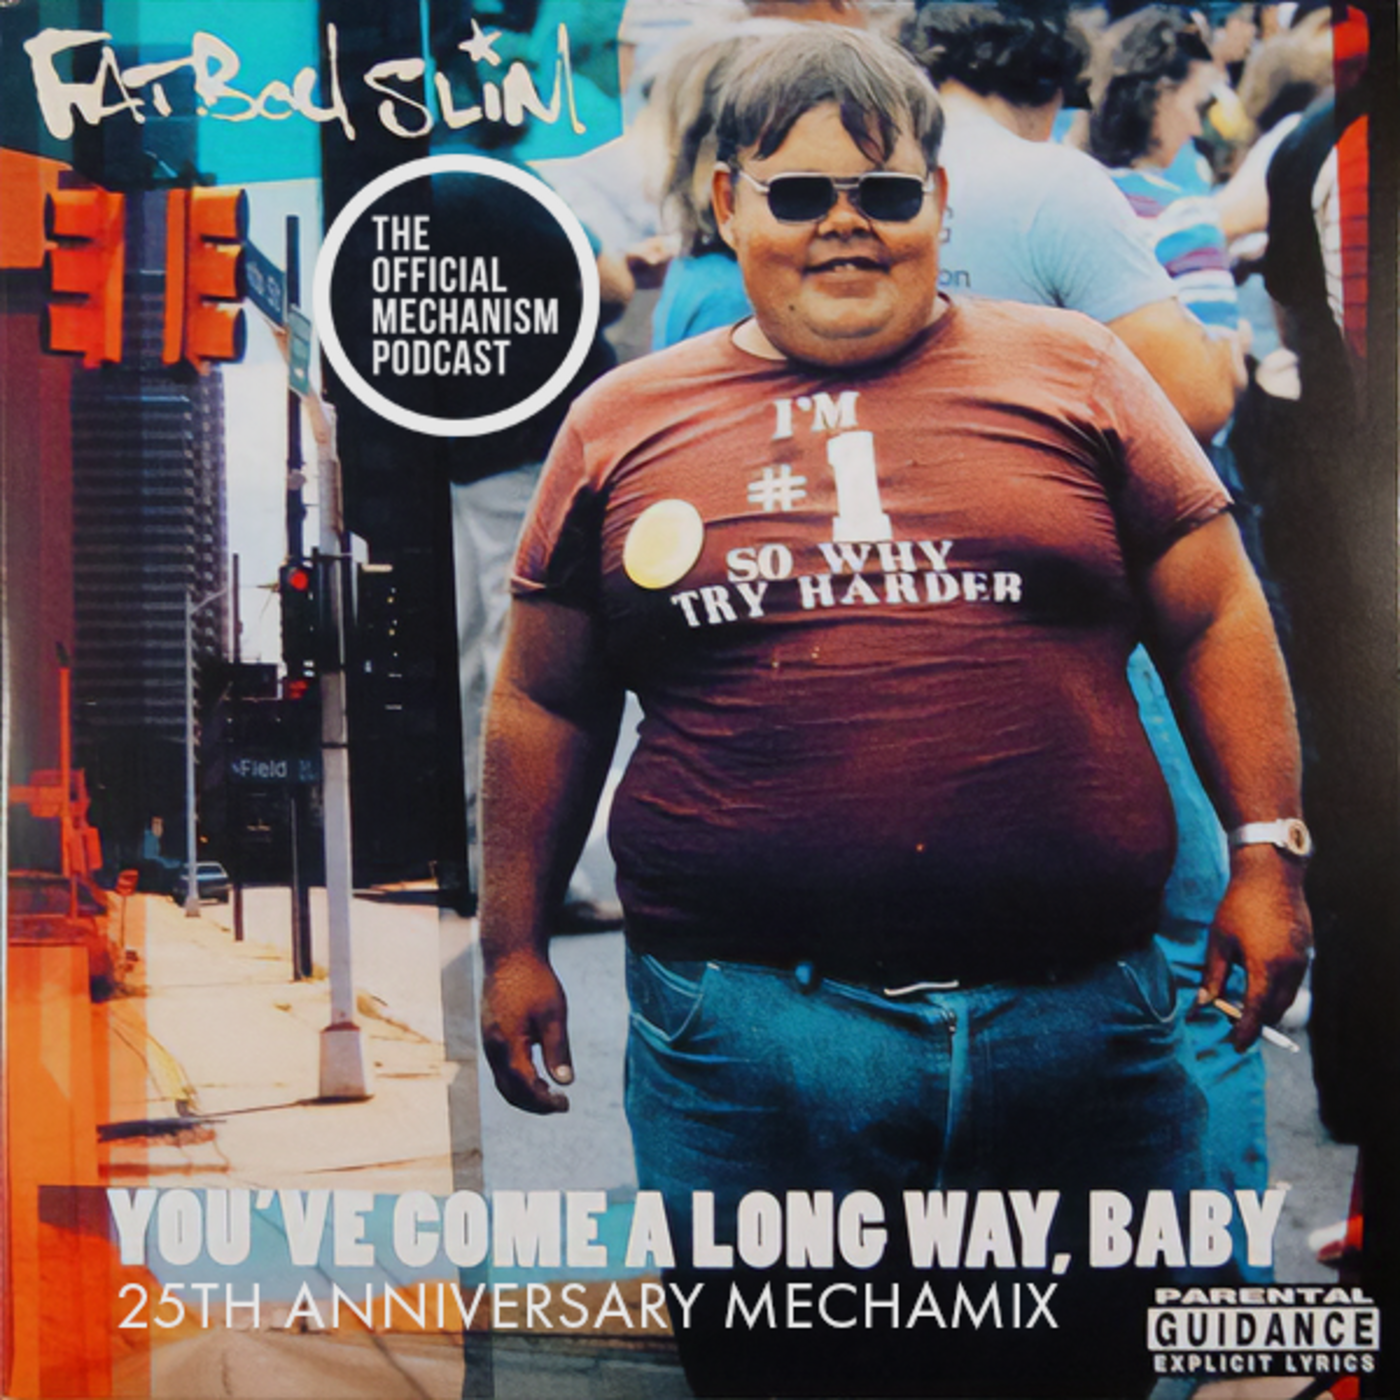 Episode 1154: FATBOY SLIM YOU'VE COME A LONG WAY, BABY 25th ANNIVERSARY MECHAMIX